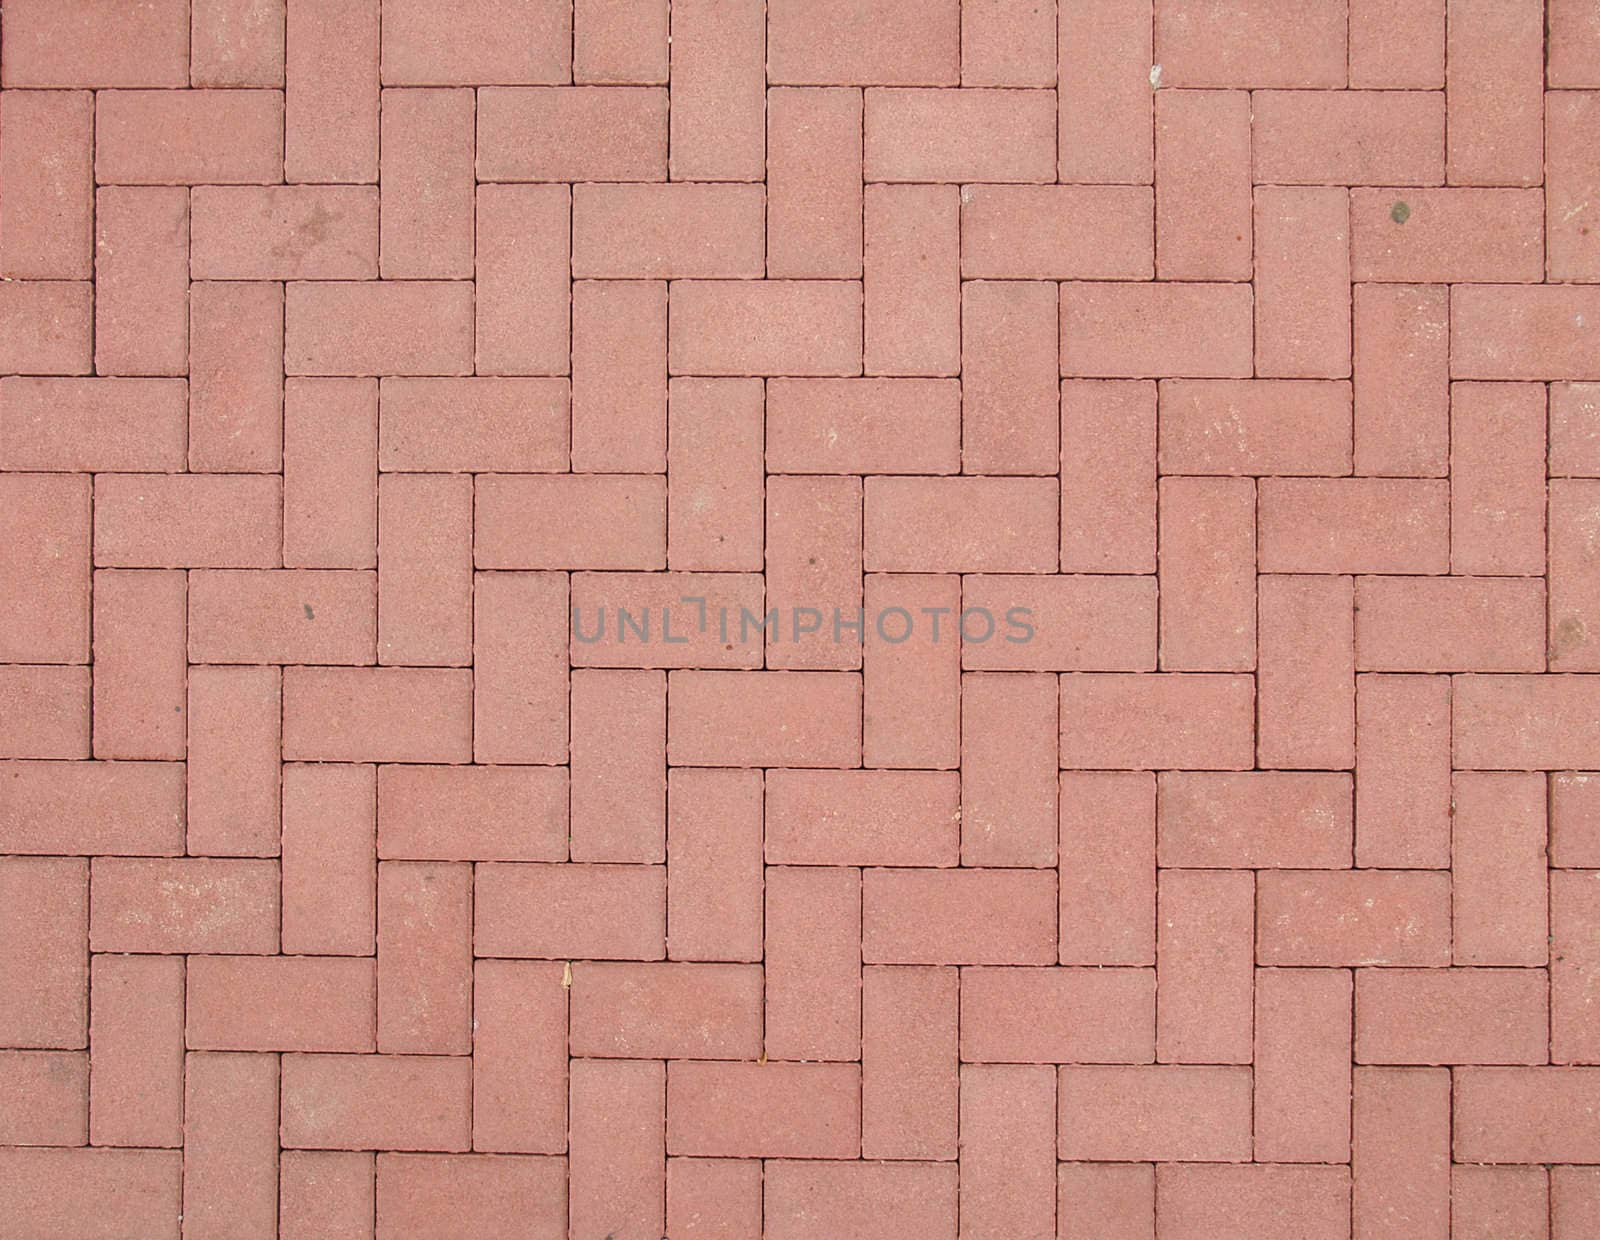 Red paving stones which can be used as texture or as a background